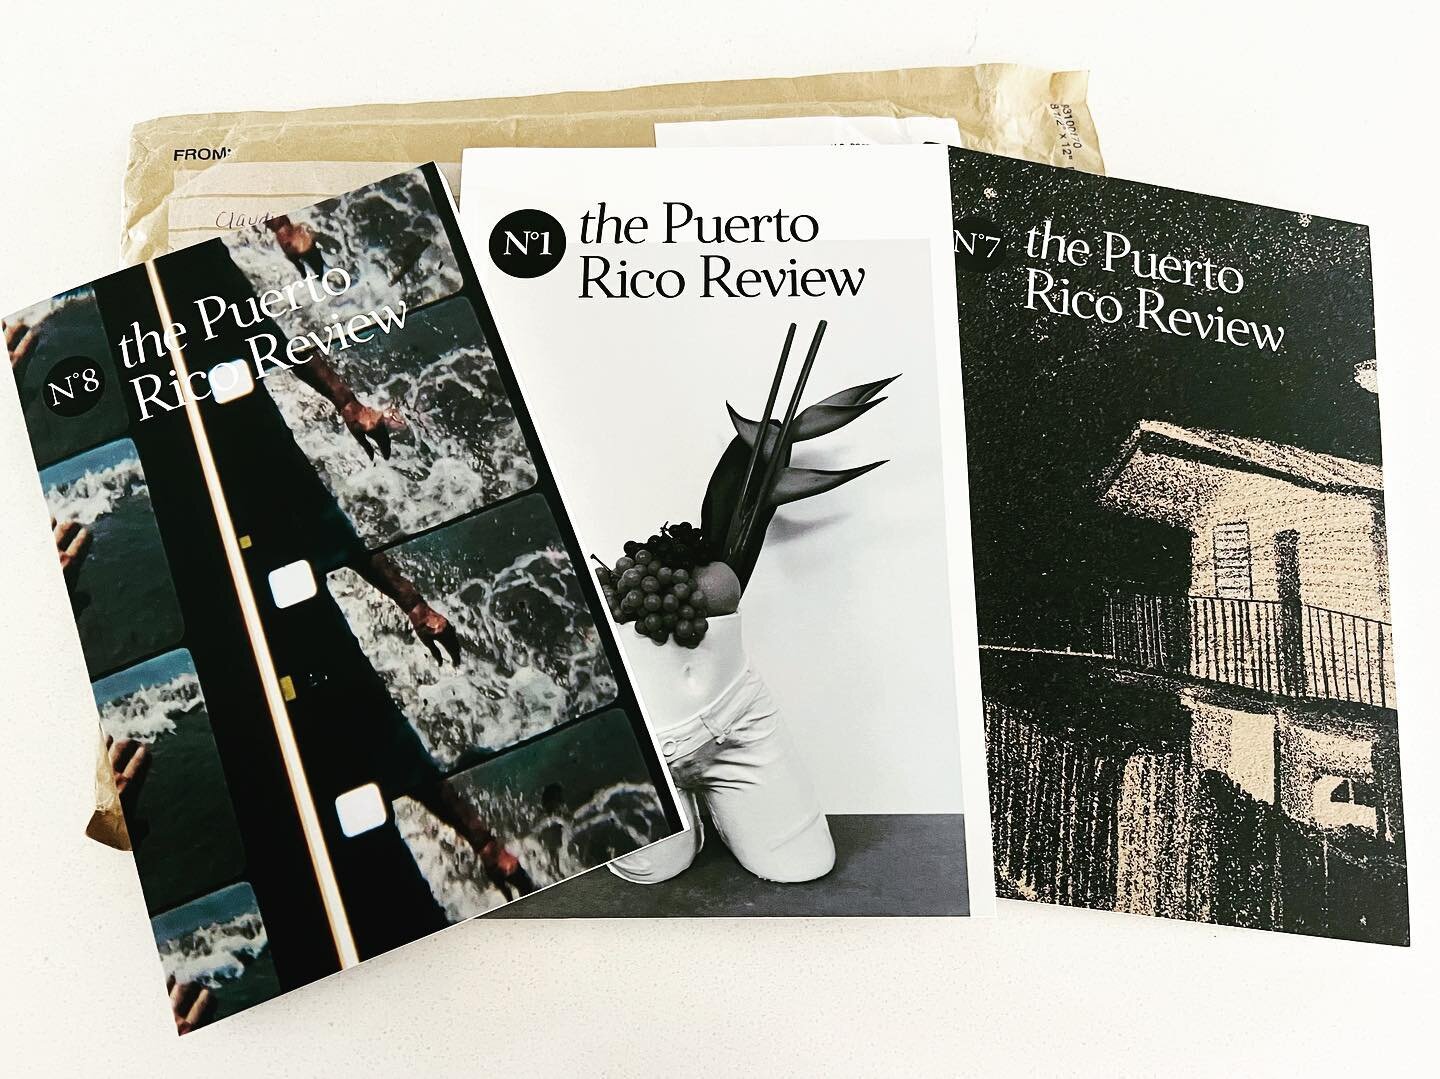 Just got these beautiful issues of @thepuertoricoreview - can&rsquo;t wait to read and to submit! 🙏🏽✊🏽🇨🇺❤️